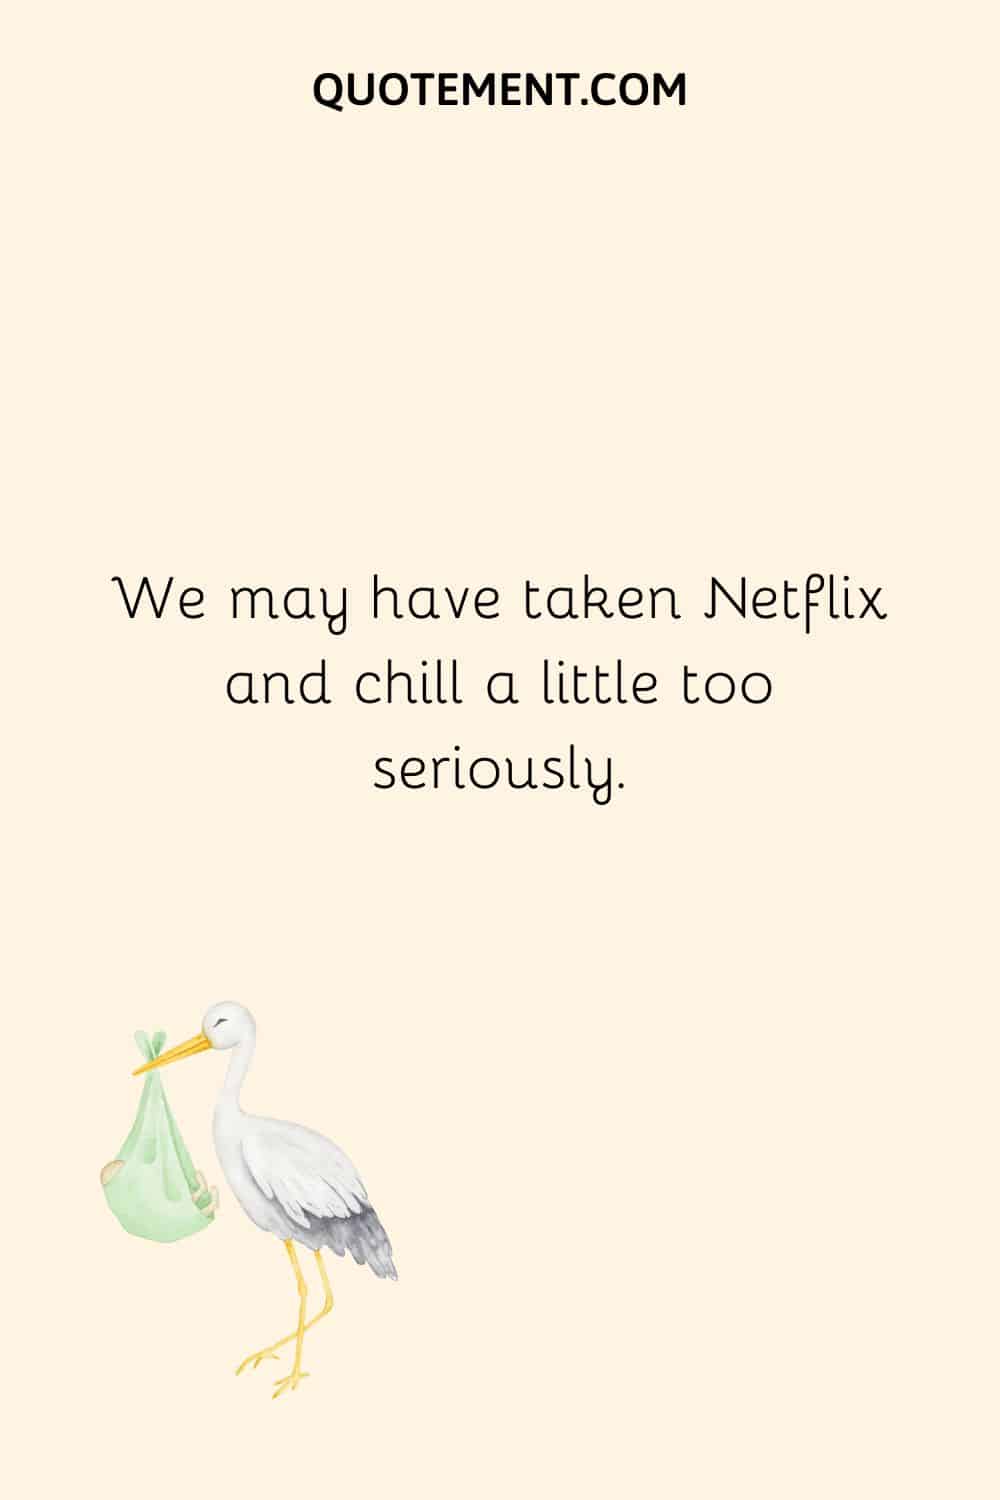 We may have taken Netflix and chill a little too seriously.